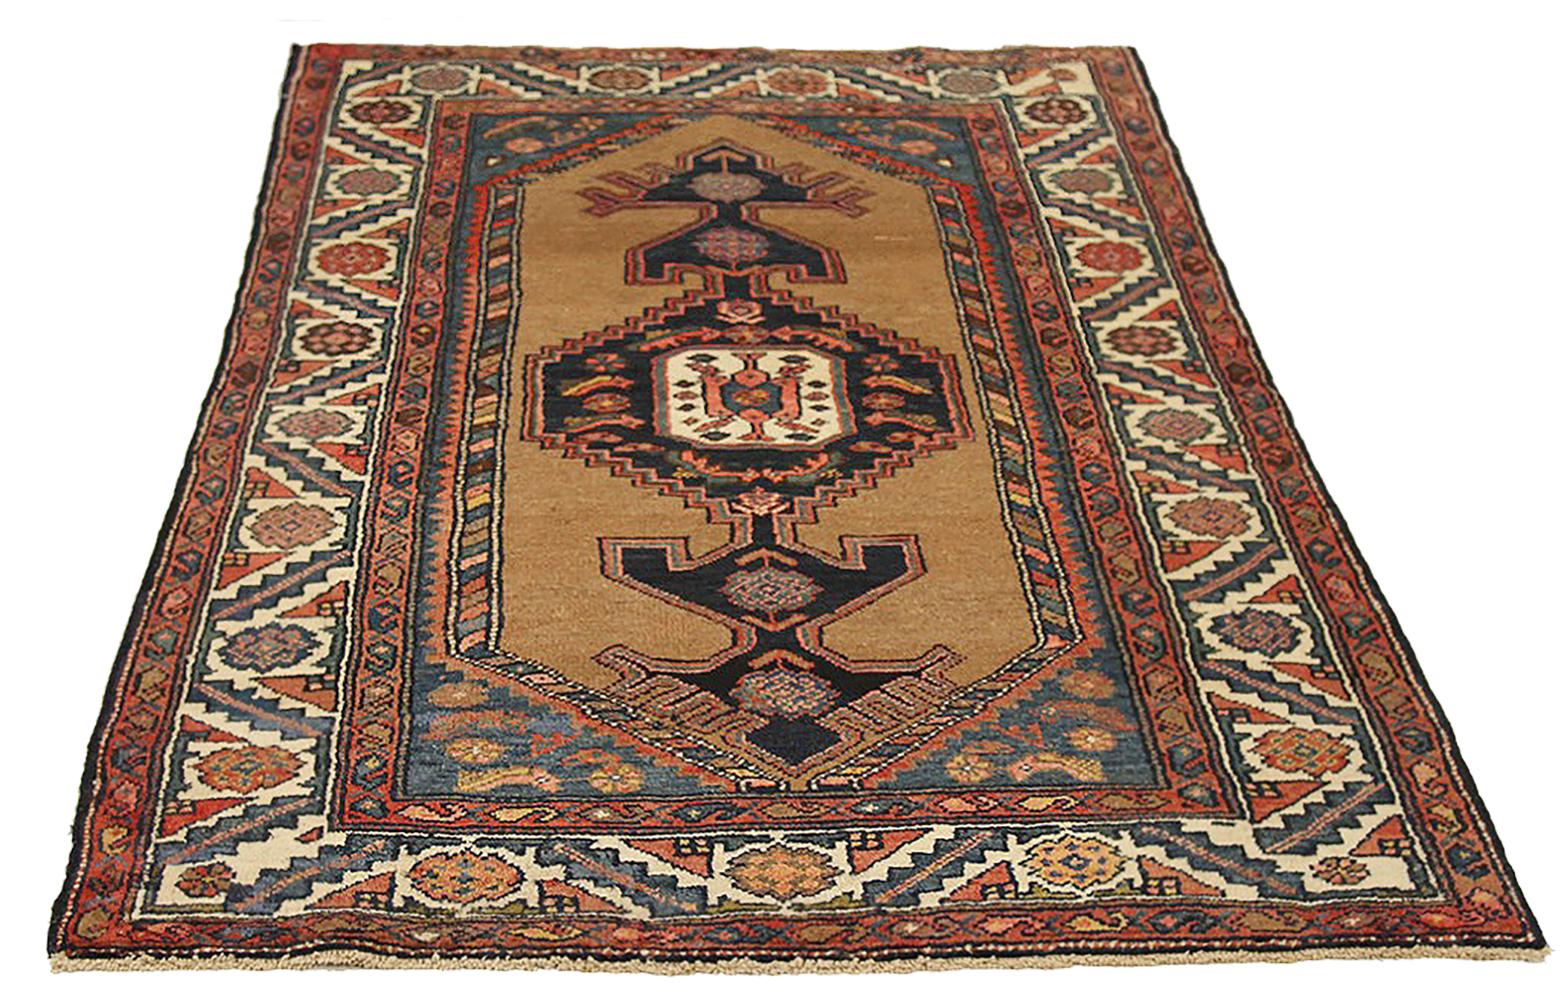 Antique Persian rug handwoven from the finest sheep’s wool and colored with all-natural vegetable dyes that are safe for humans and pets. It’s a traditional Hamedan design featuring geometric and tribal patterns in bold colors of brown and navy over